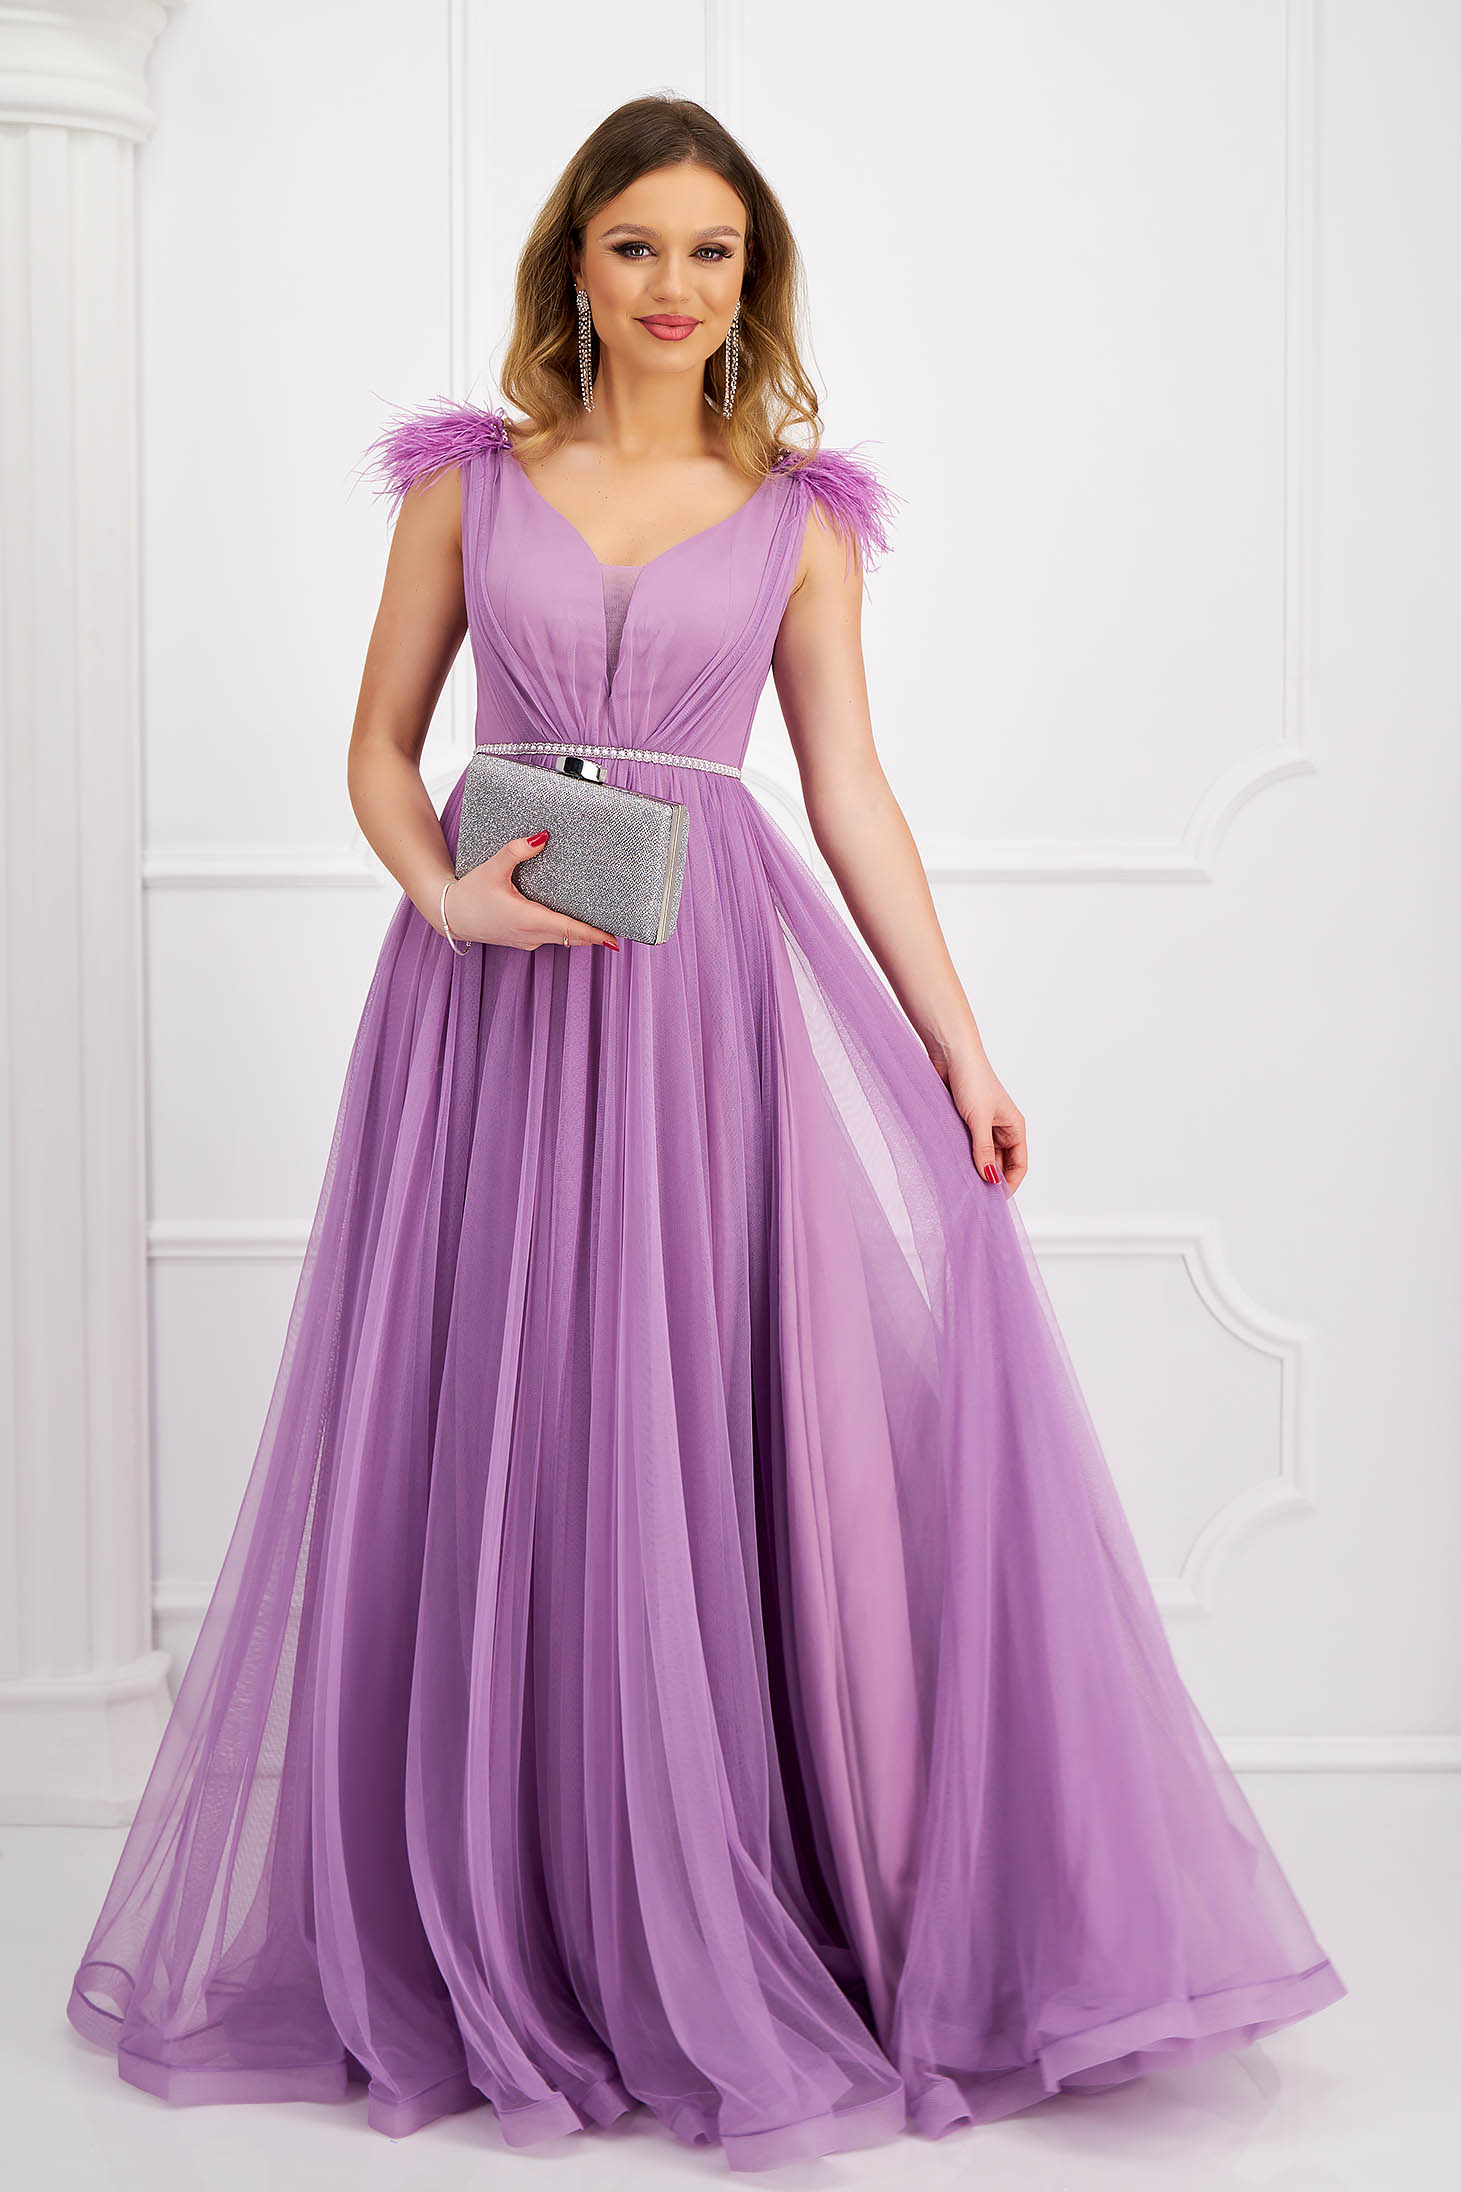 Long lilac tulle dress in flared style accessorized with rhinestones and feathers 4 - StarShinerS.com